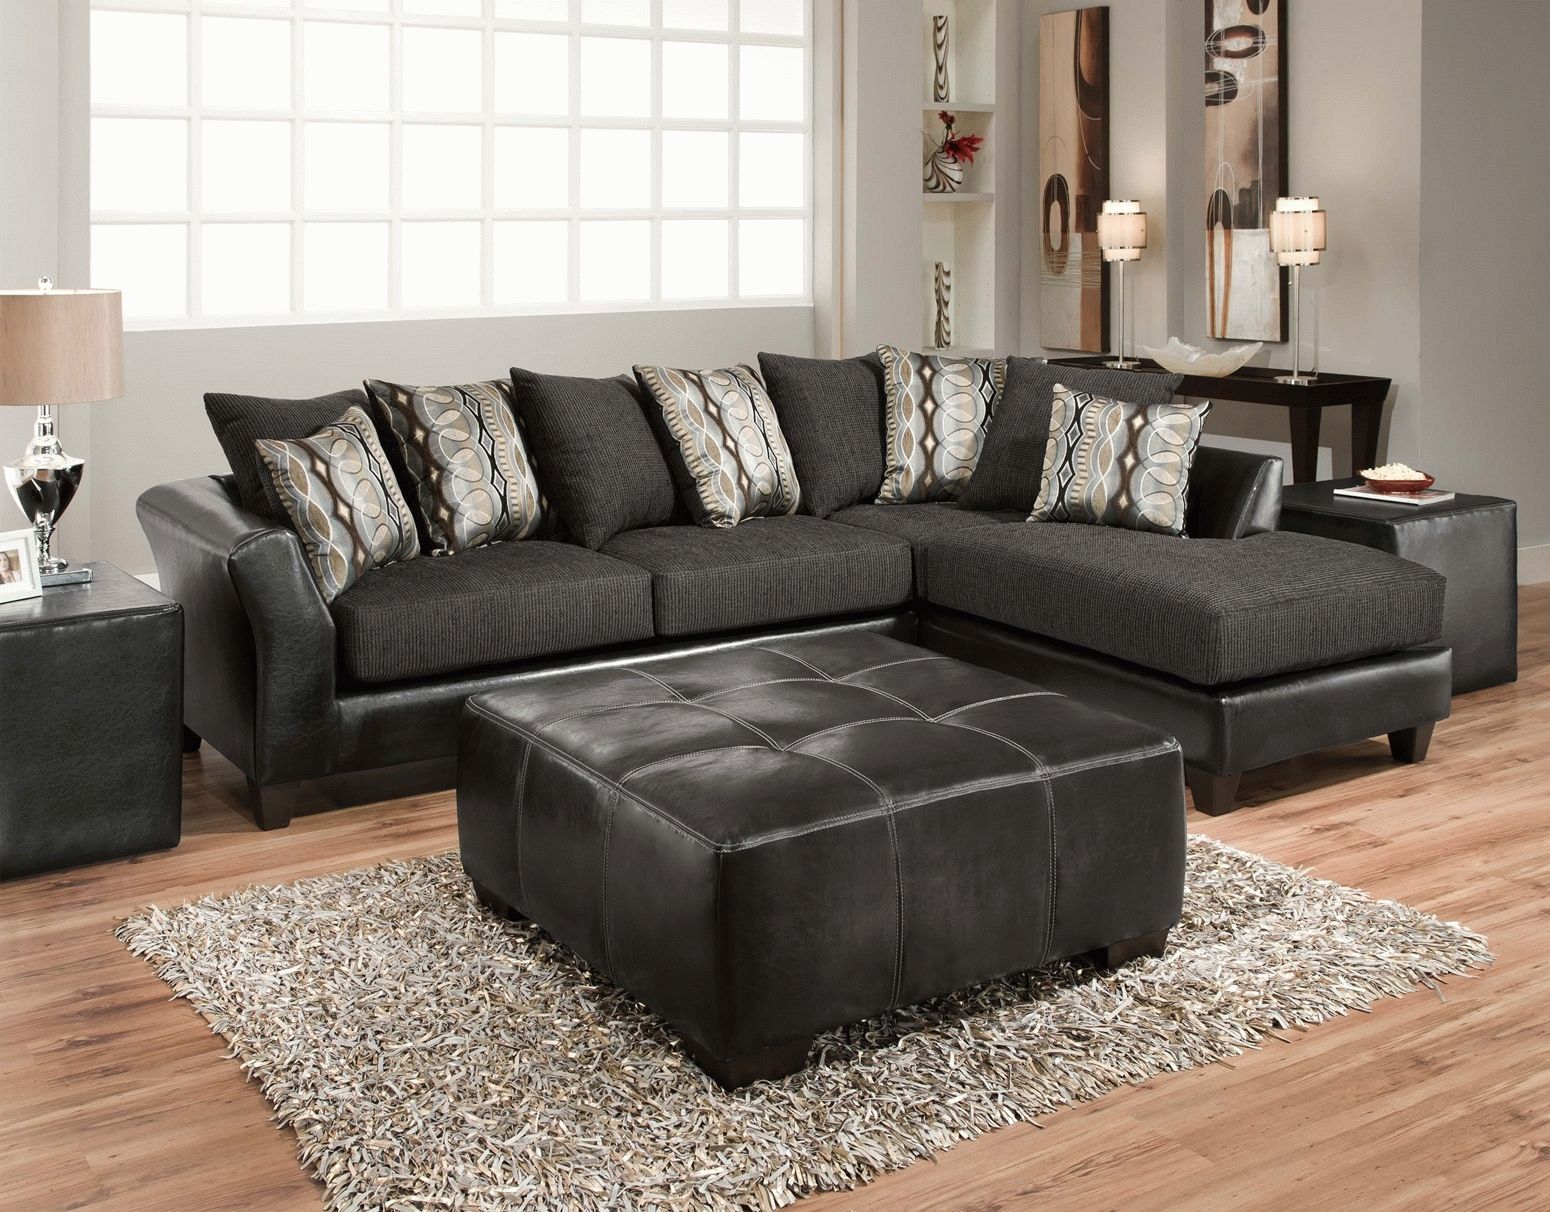 Black And White Or Charcoal Sectional W/chaise End With Black And White Sectional (View 13 of 15)